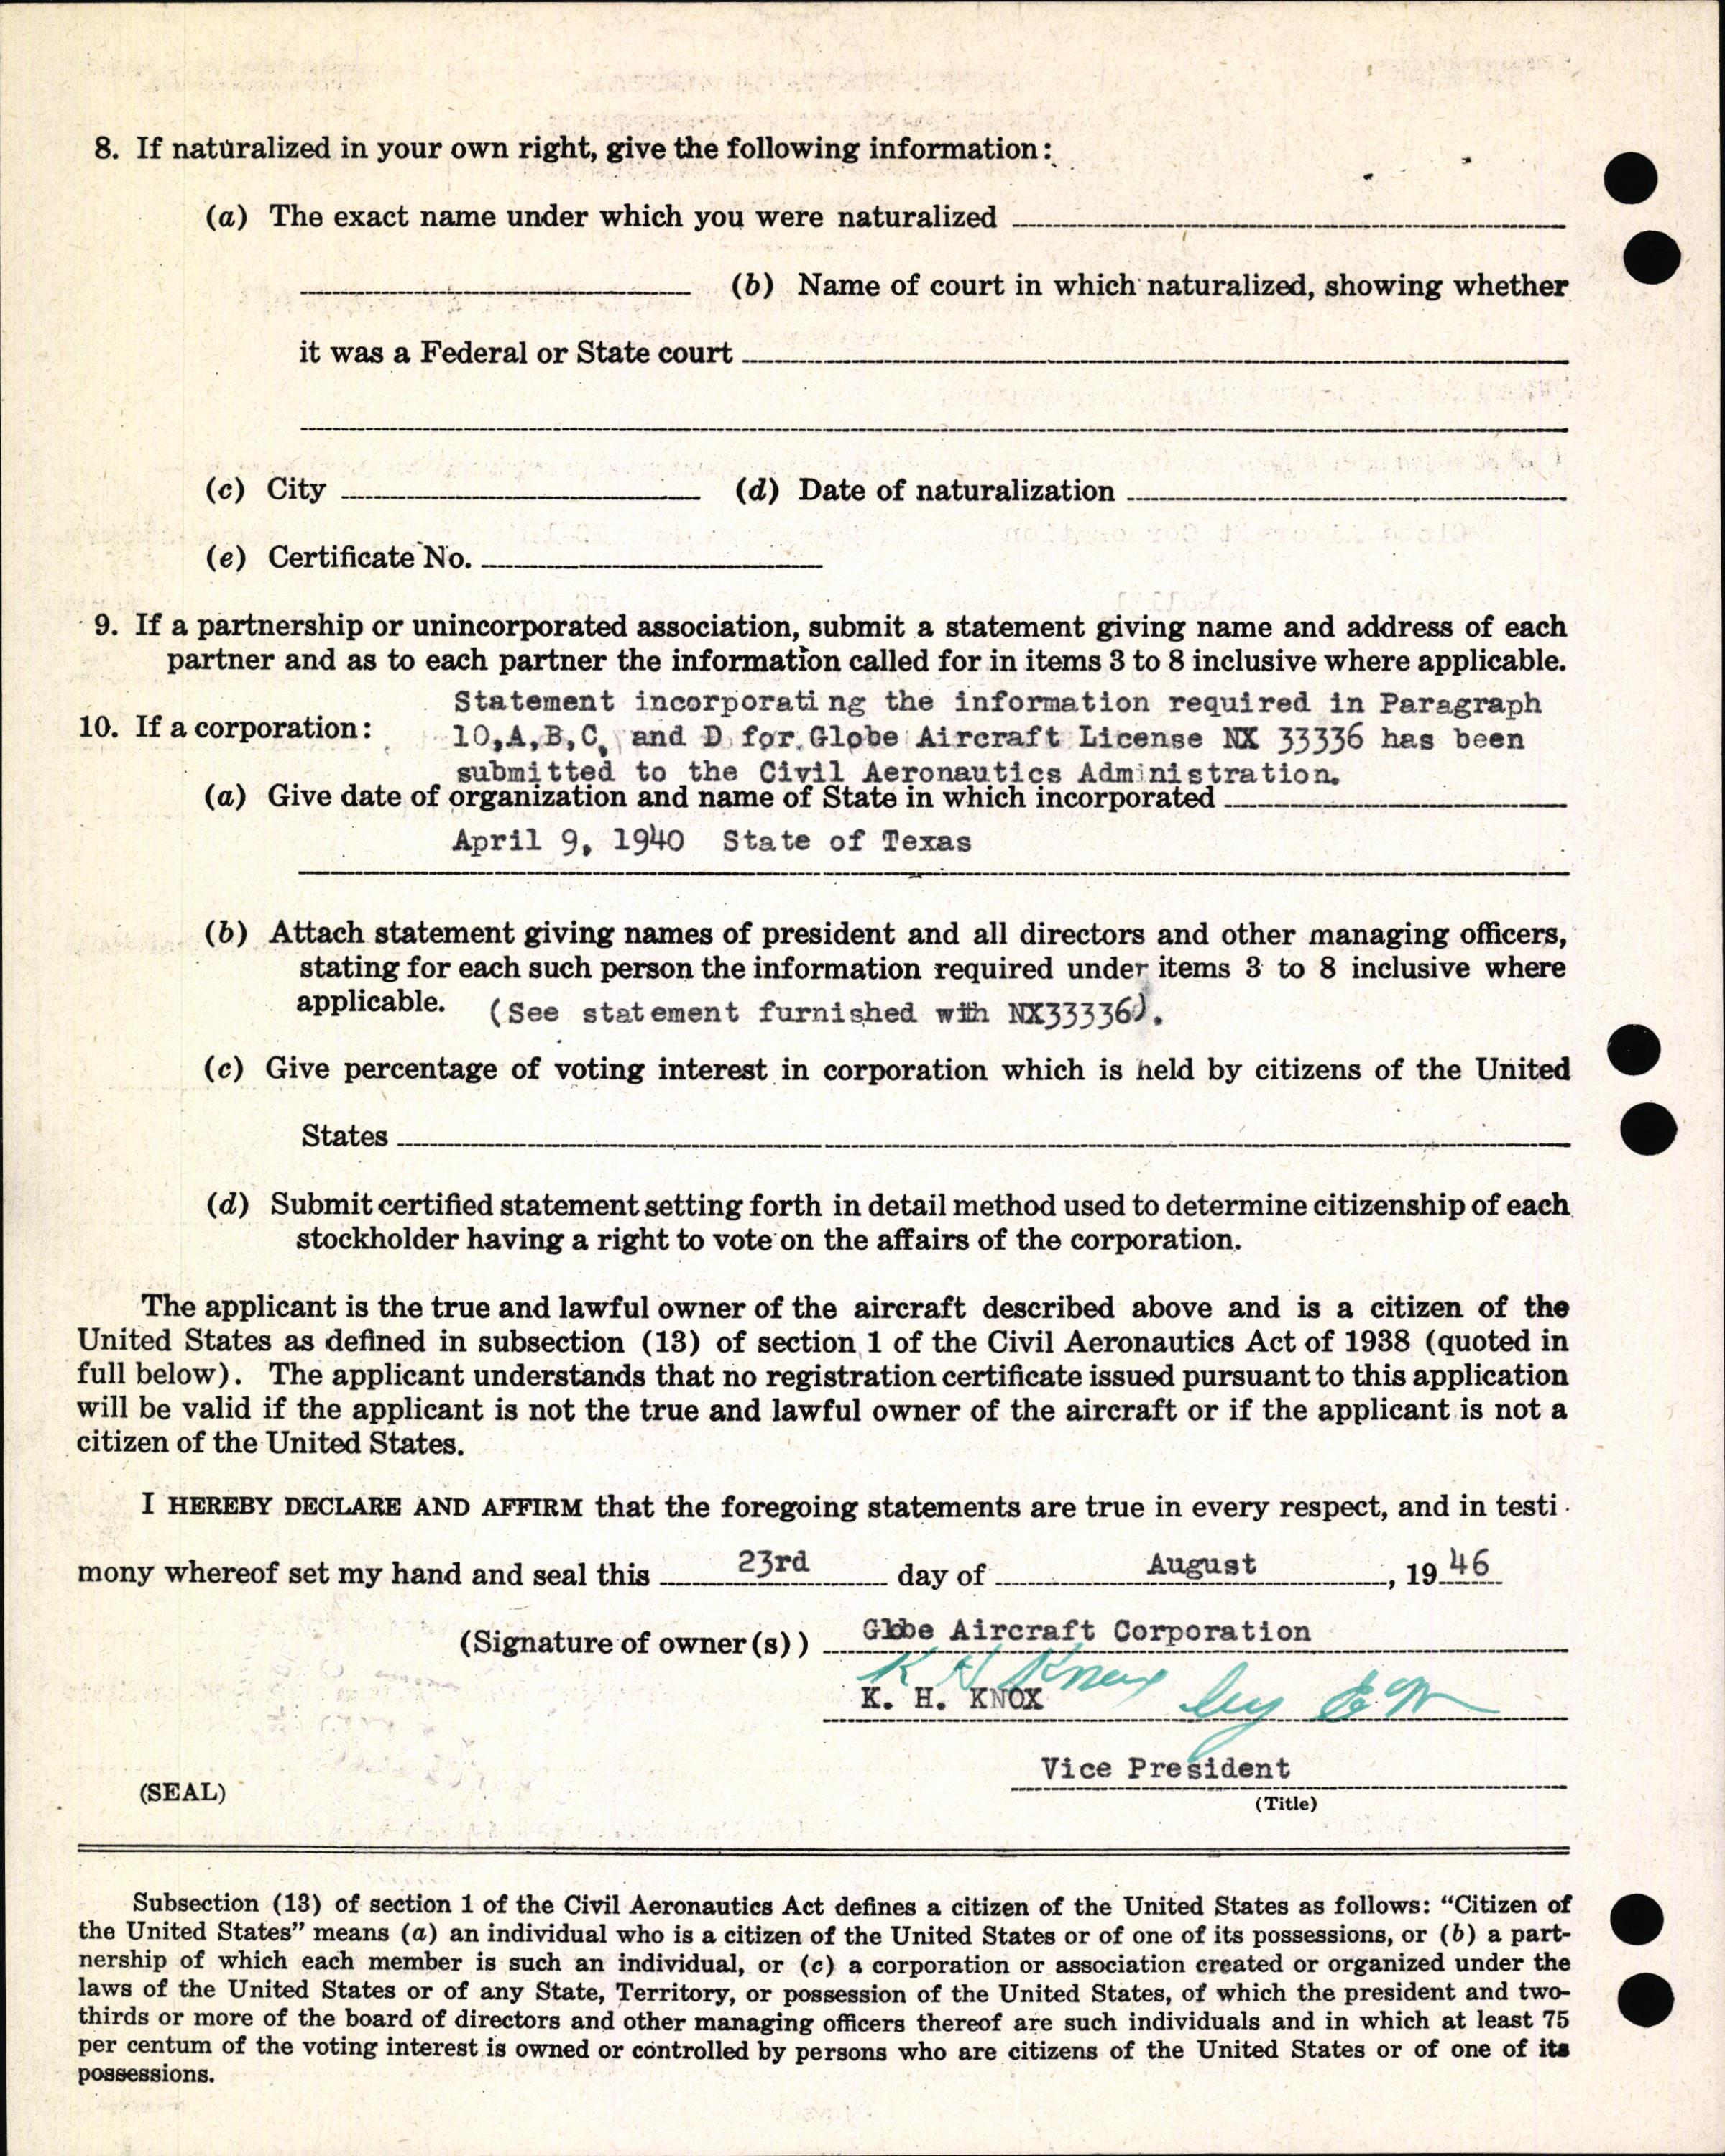 Sample page 4 from AirCorps Library document: Technical Information for Serial Number 1131